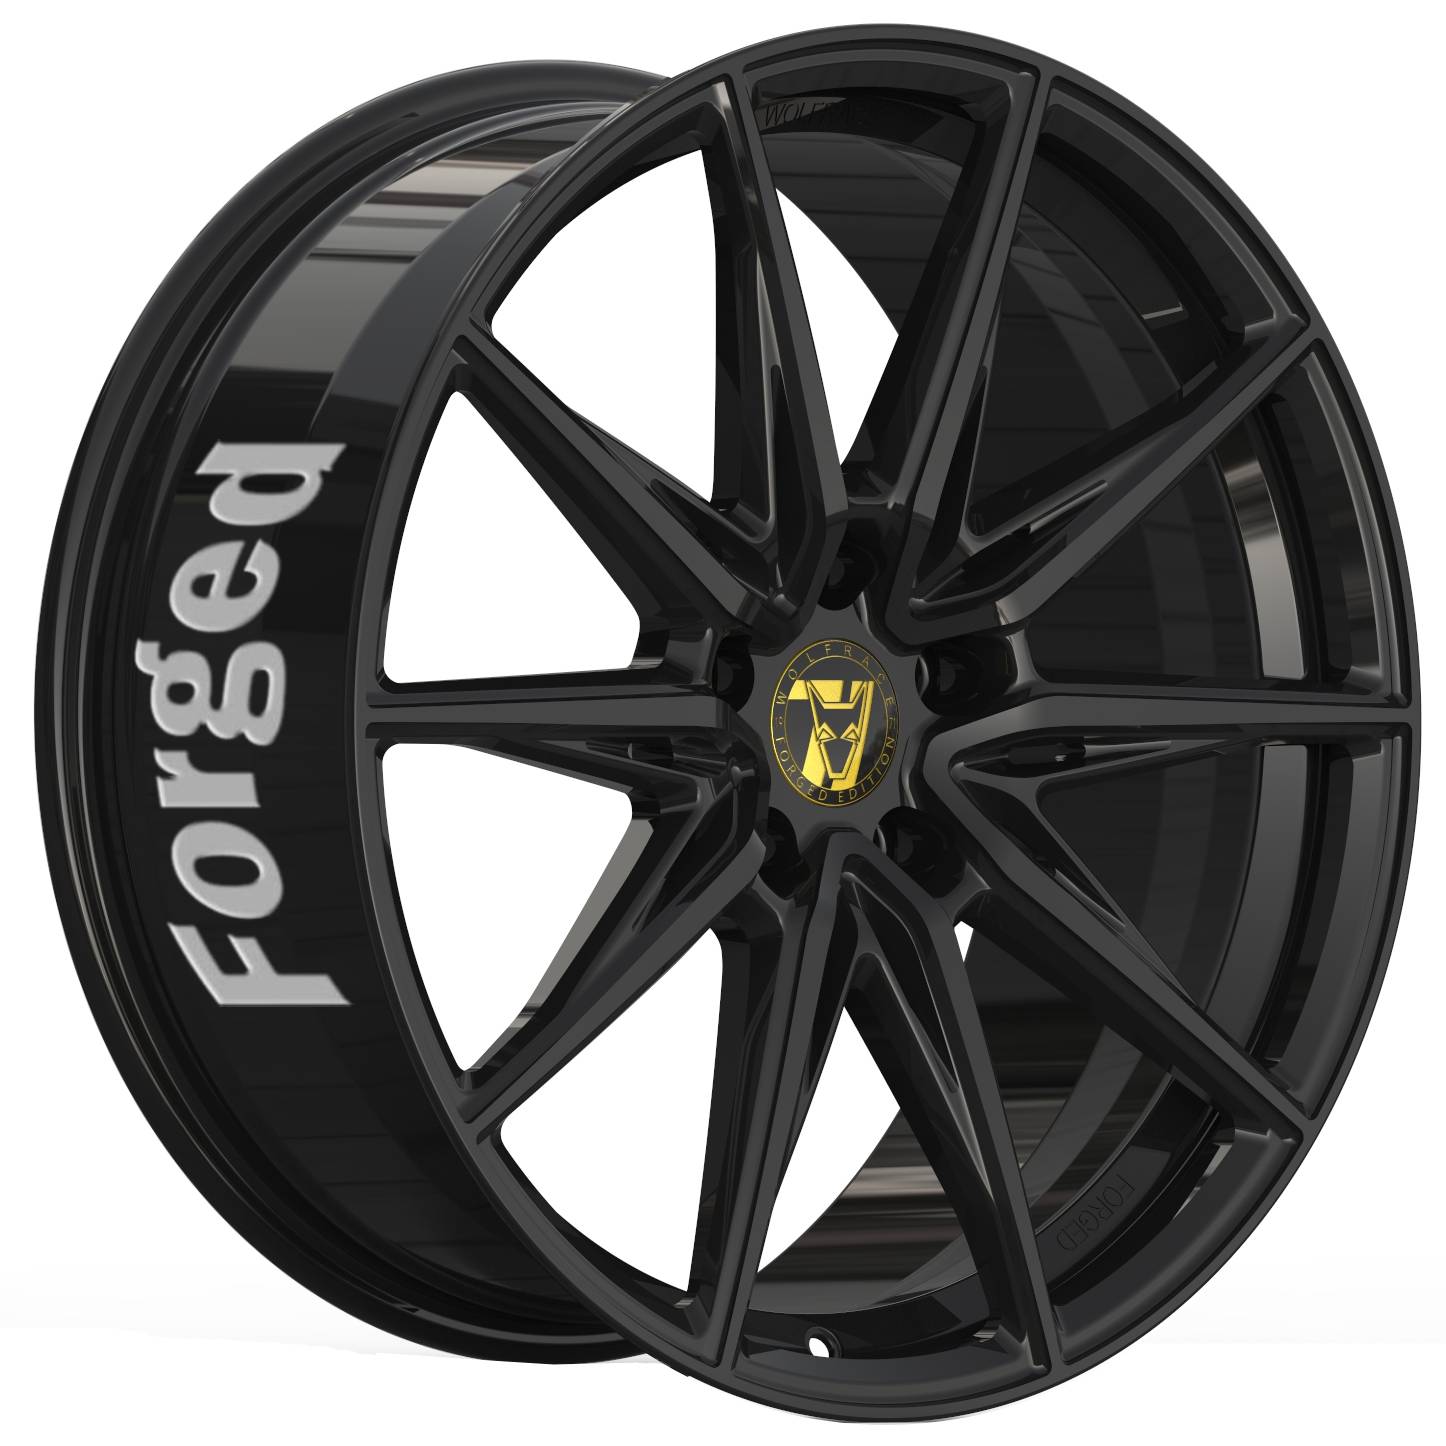 Jantes alu Demon Wheels 71 Forged Edition Urban Racer Forged [8.5x20] -5x114.3- ET 20